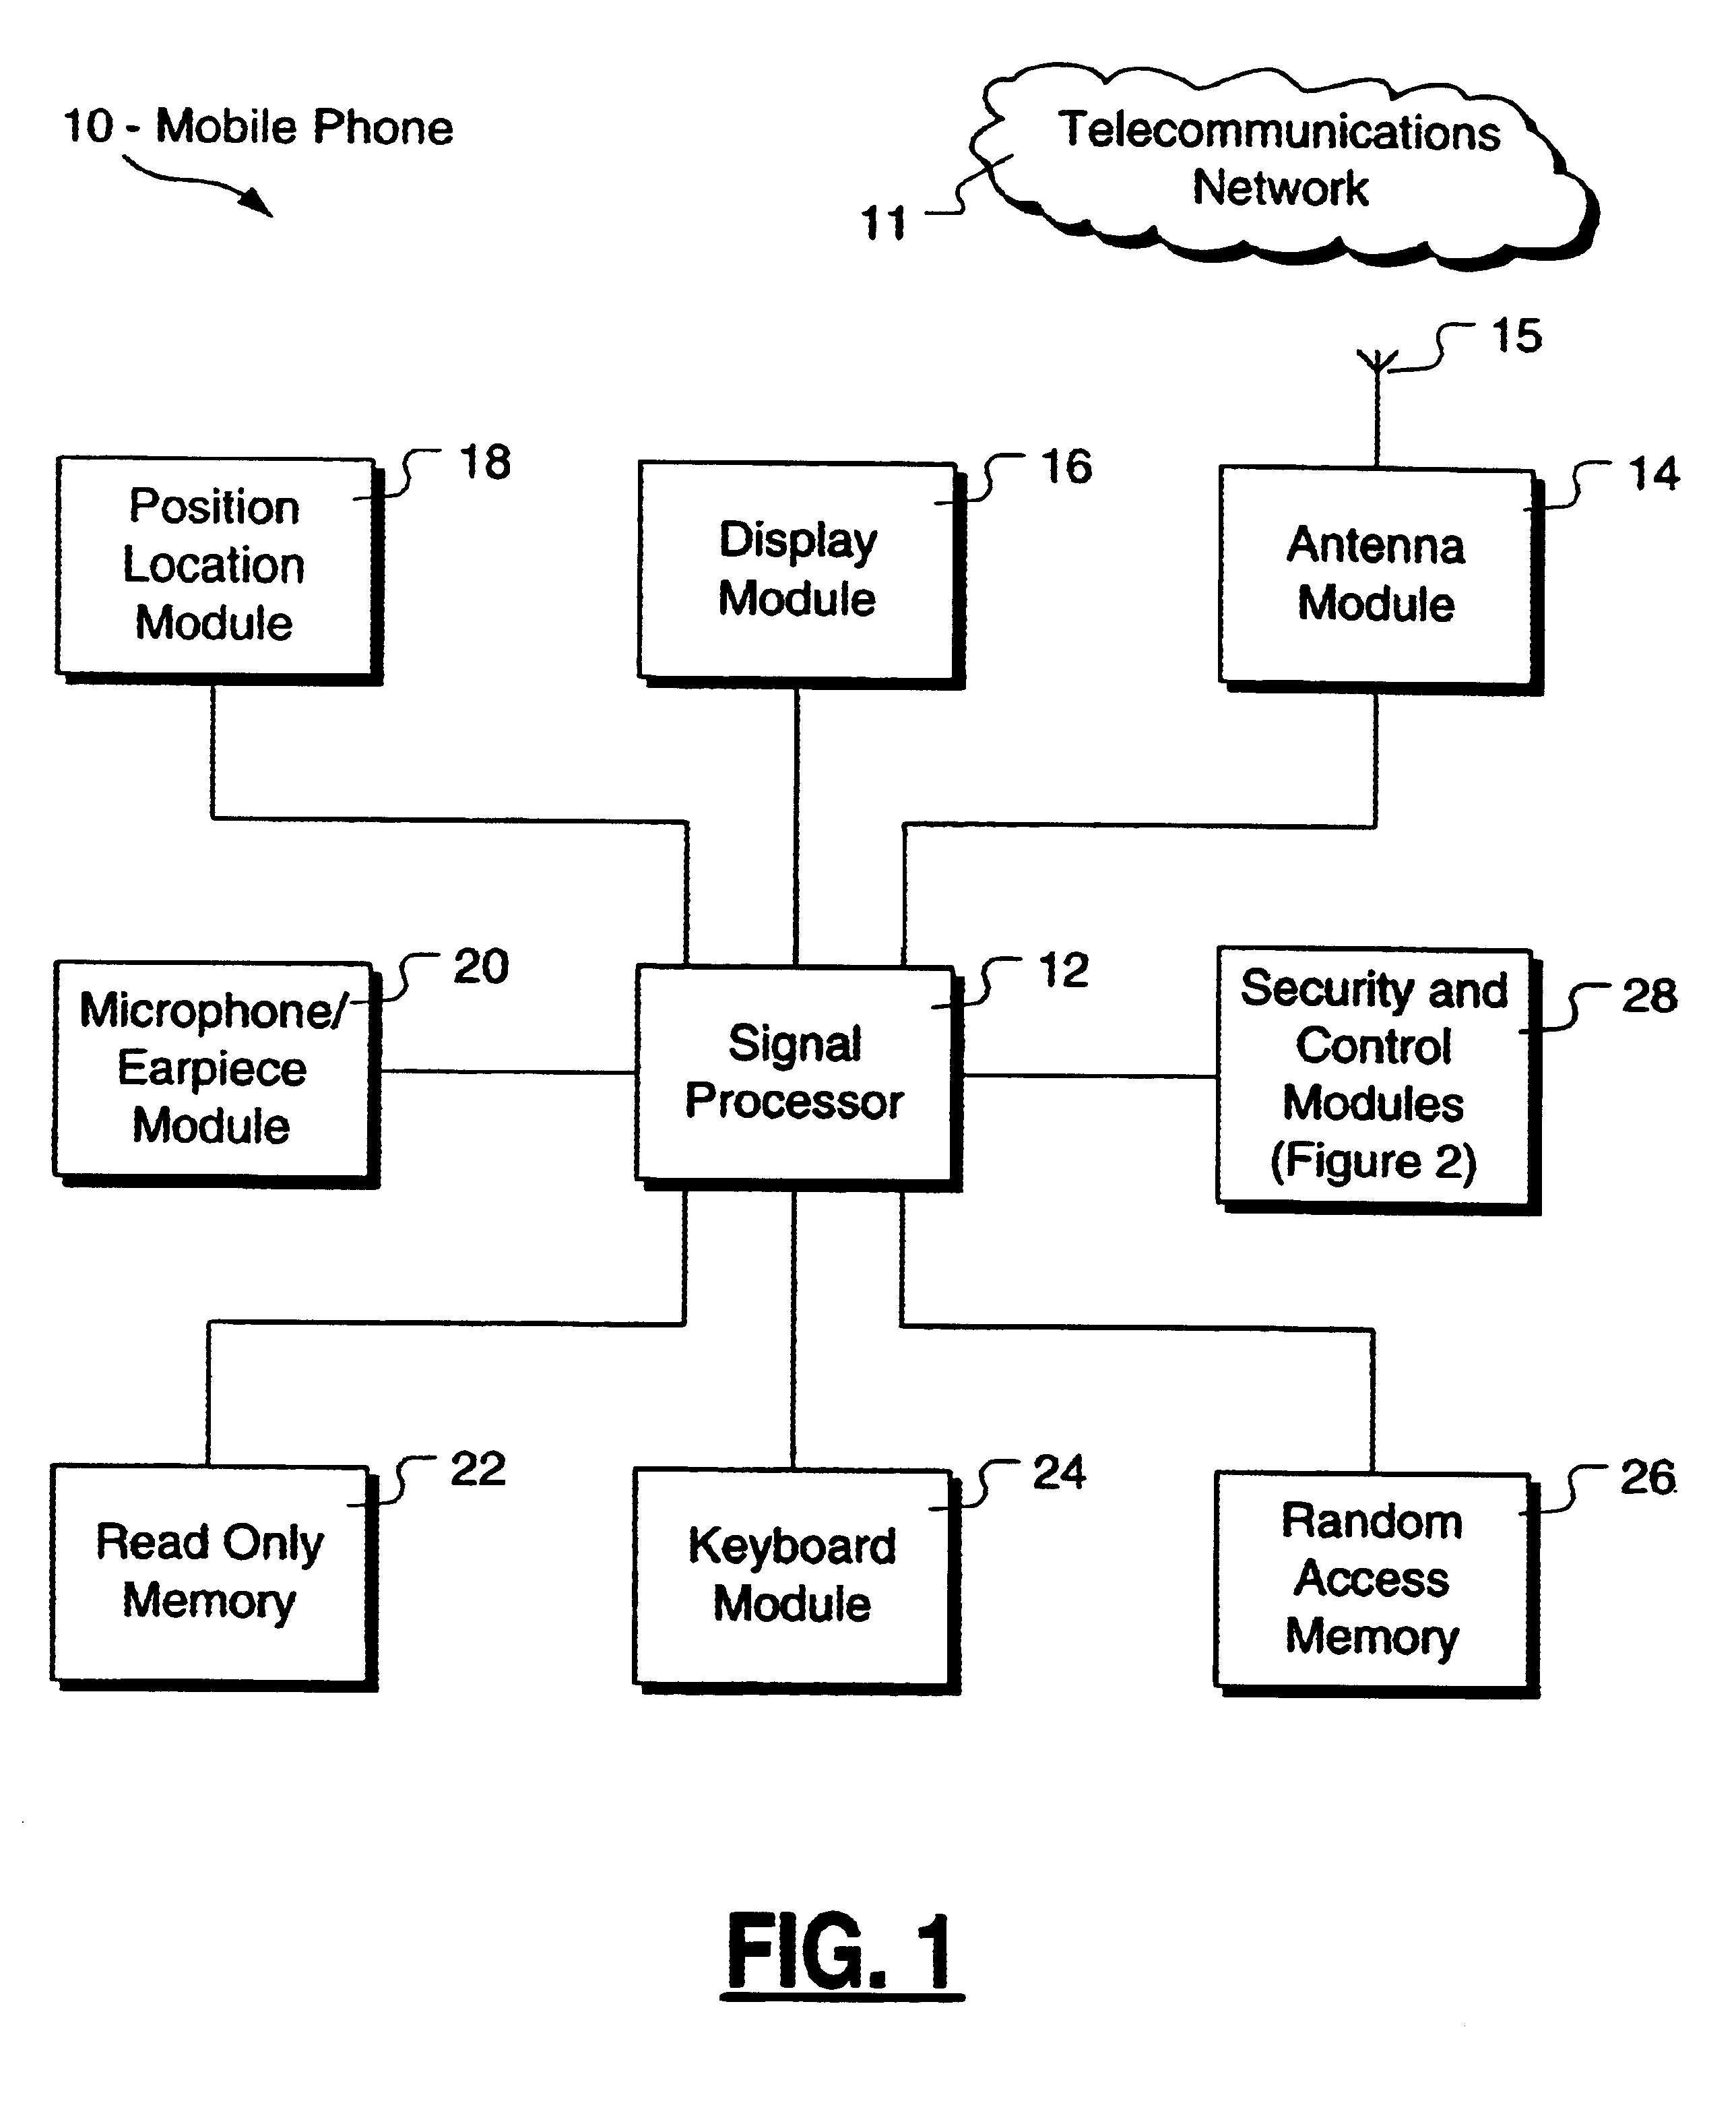 Method and apparatus for controlling and securing mobile phones that are lost, stolen or misused